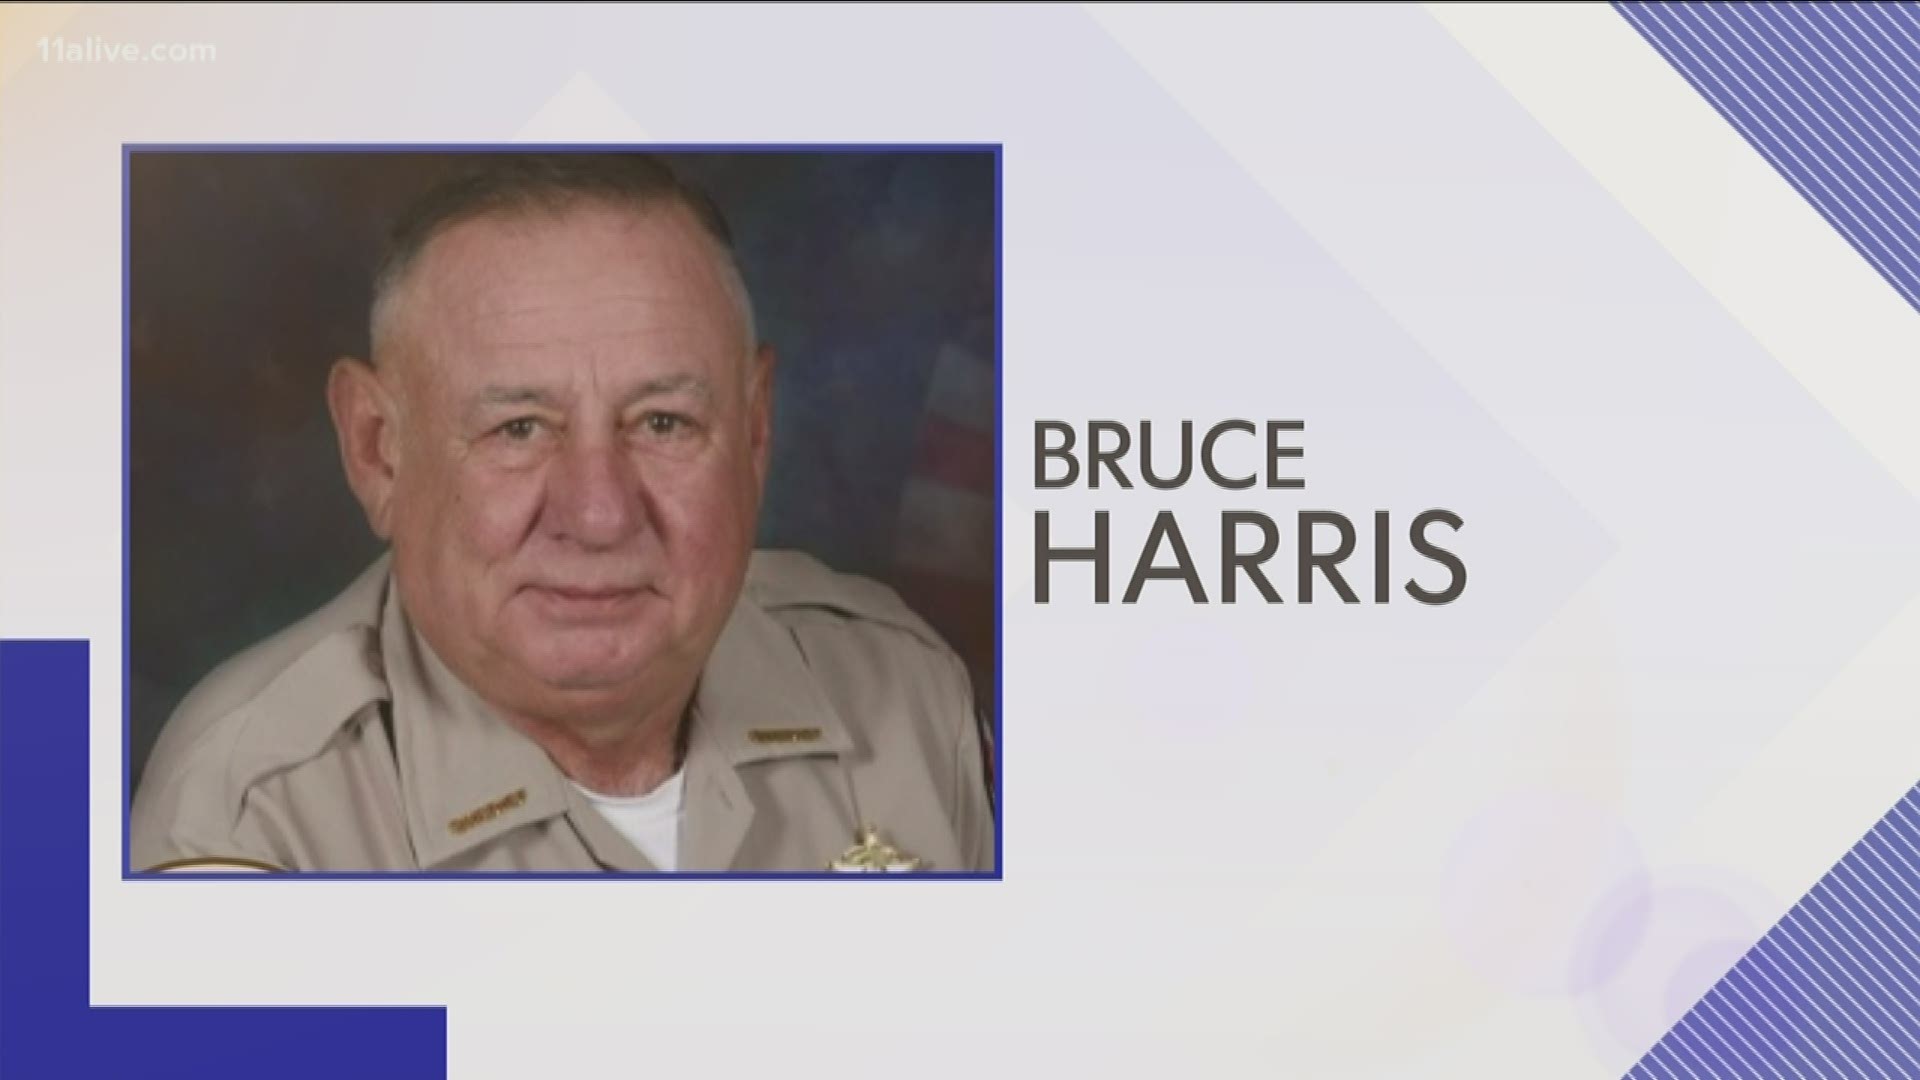 Harris was a sheriff for more than 15 years and a state trooper for 18 years before that.